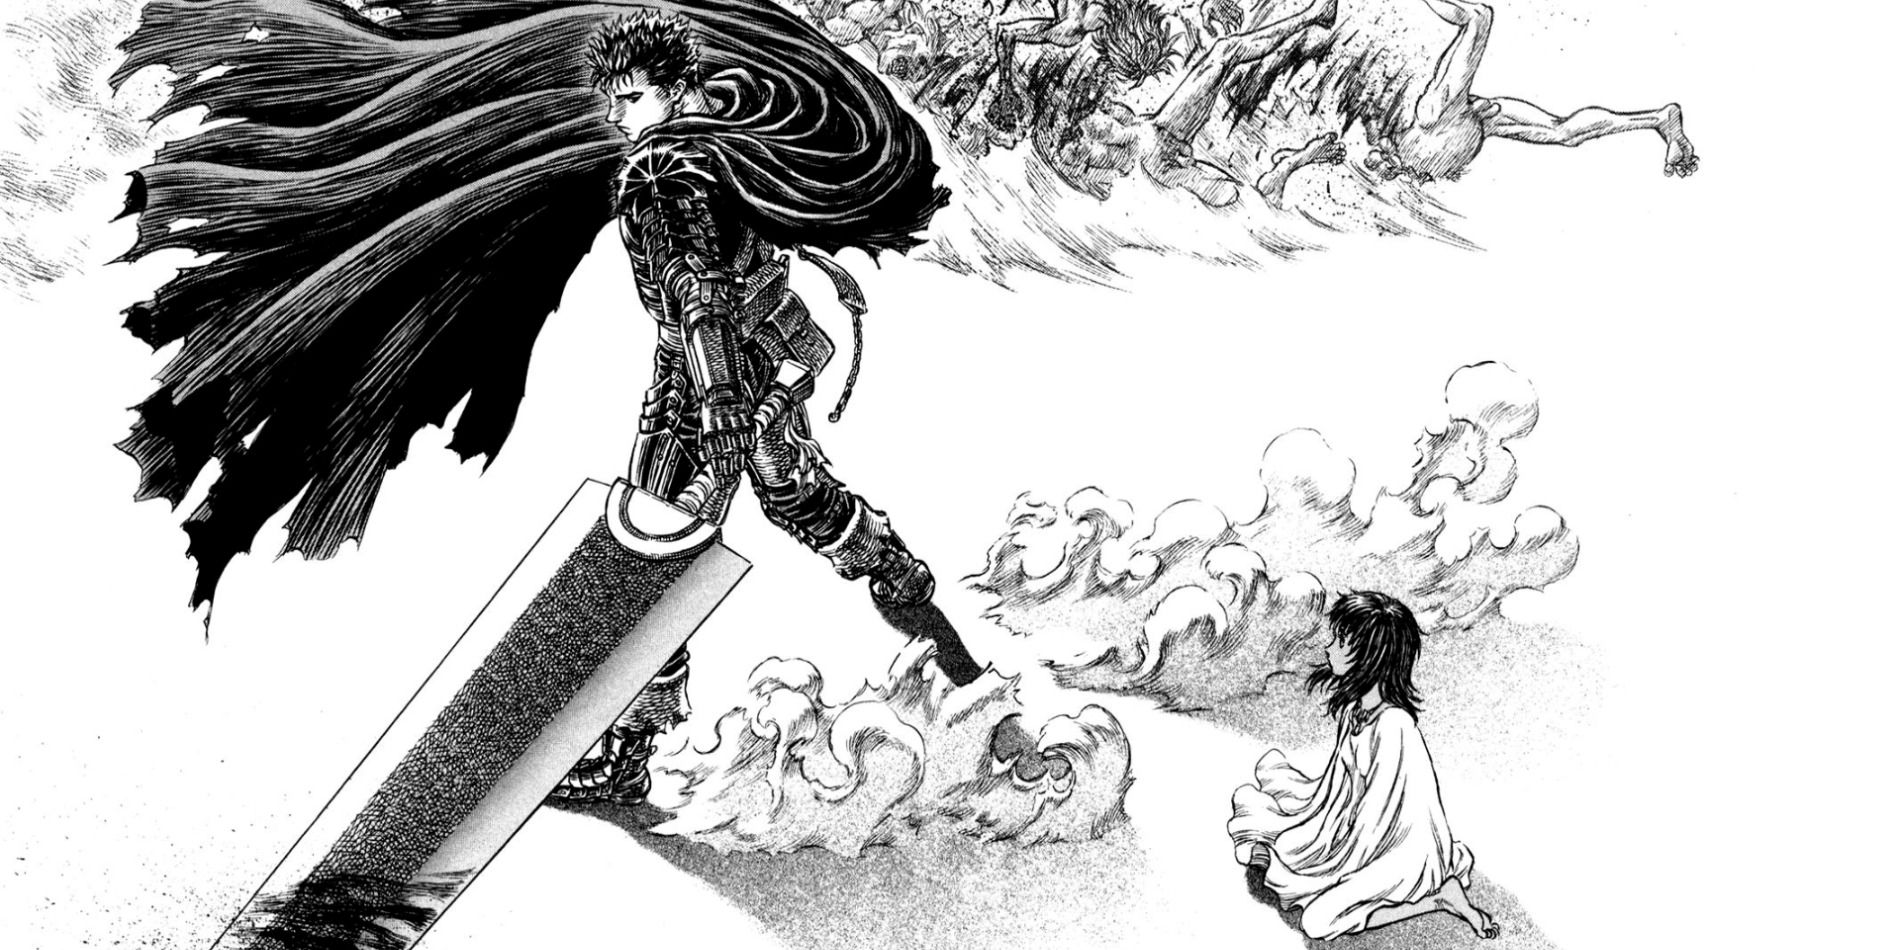 Guts and Casca reuniting during the Conviction arc of the manga